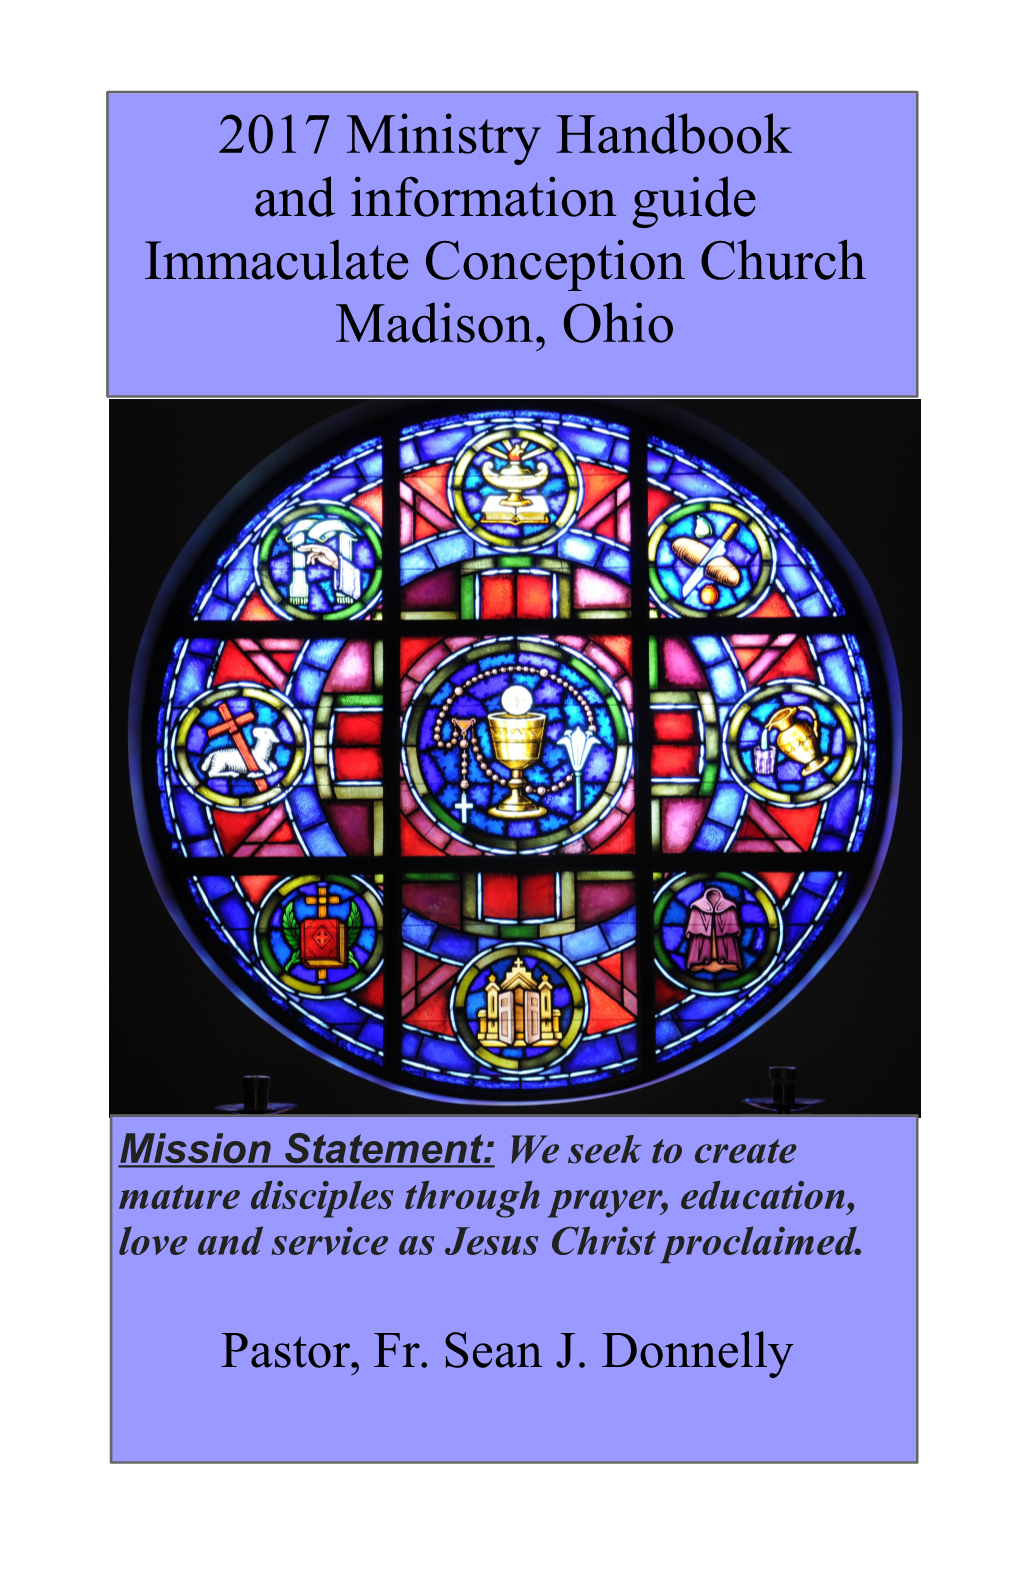 Ministry Handbook and Information Guide Immaculate Conception Church Madison, Ohio